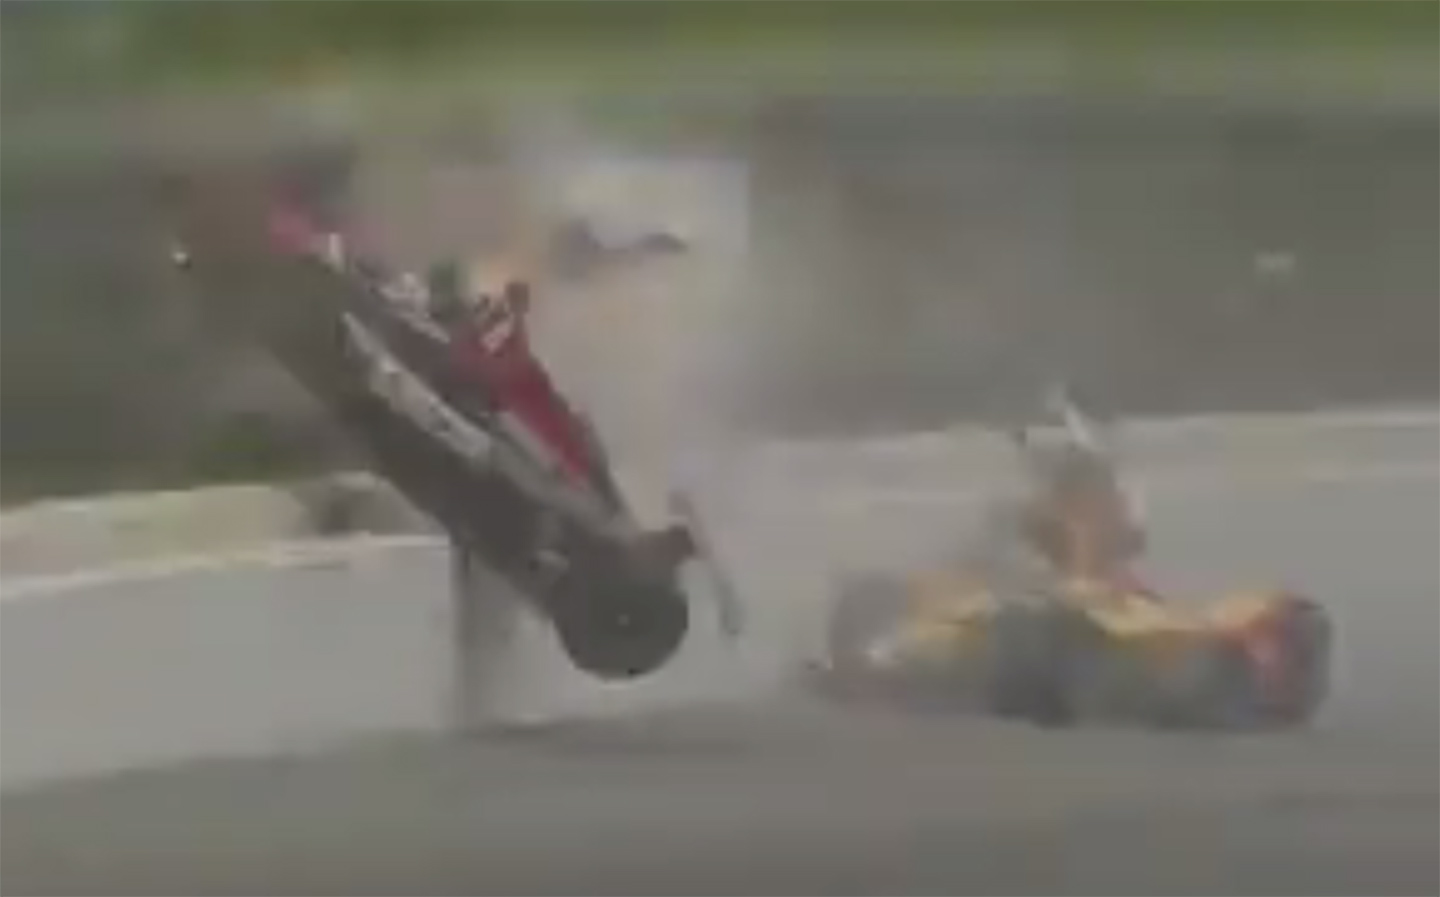 Should IndyCar adopt the Halo after this horrific crash?